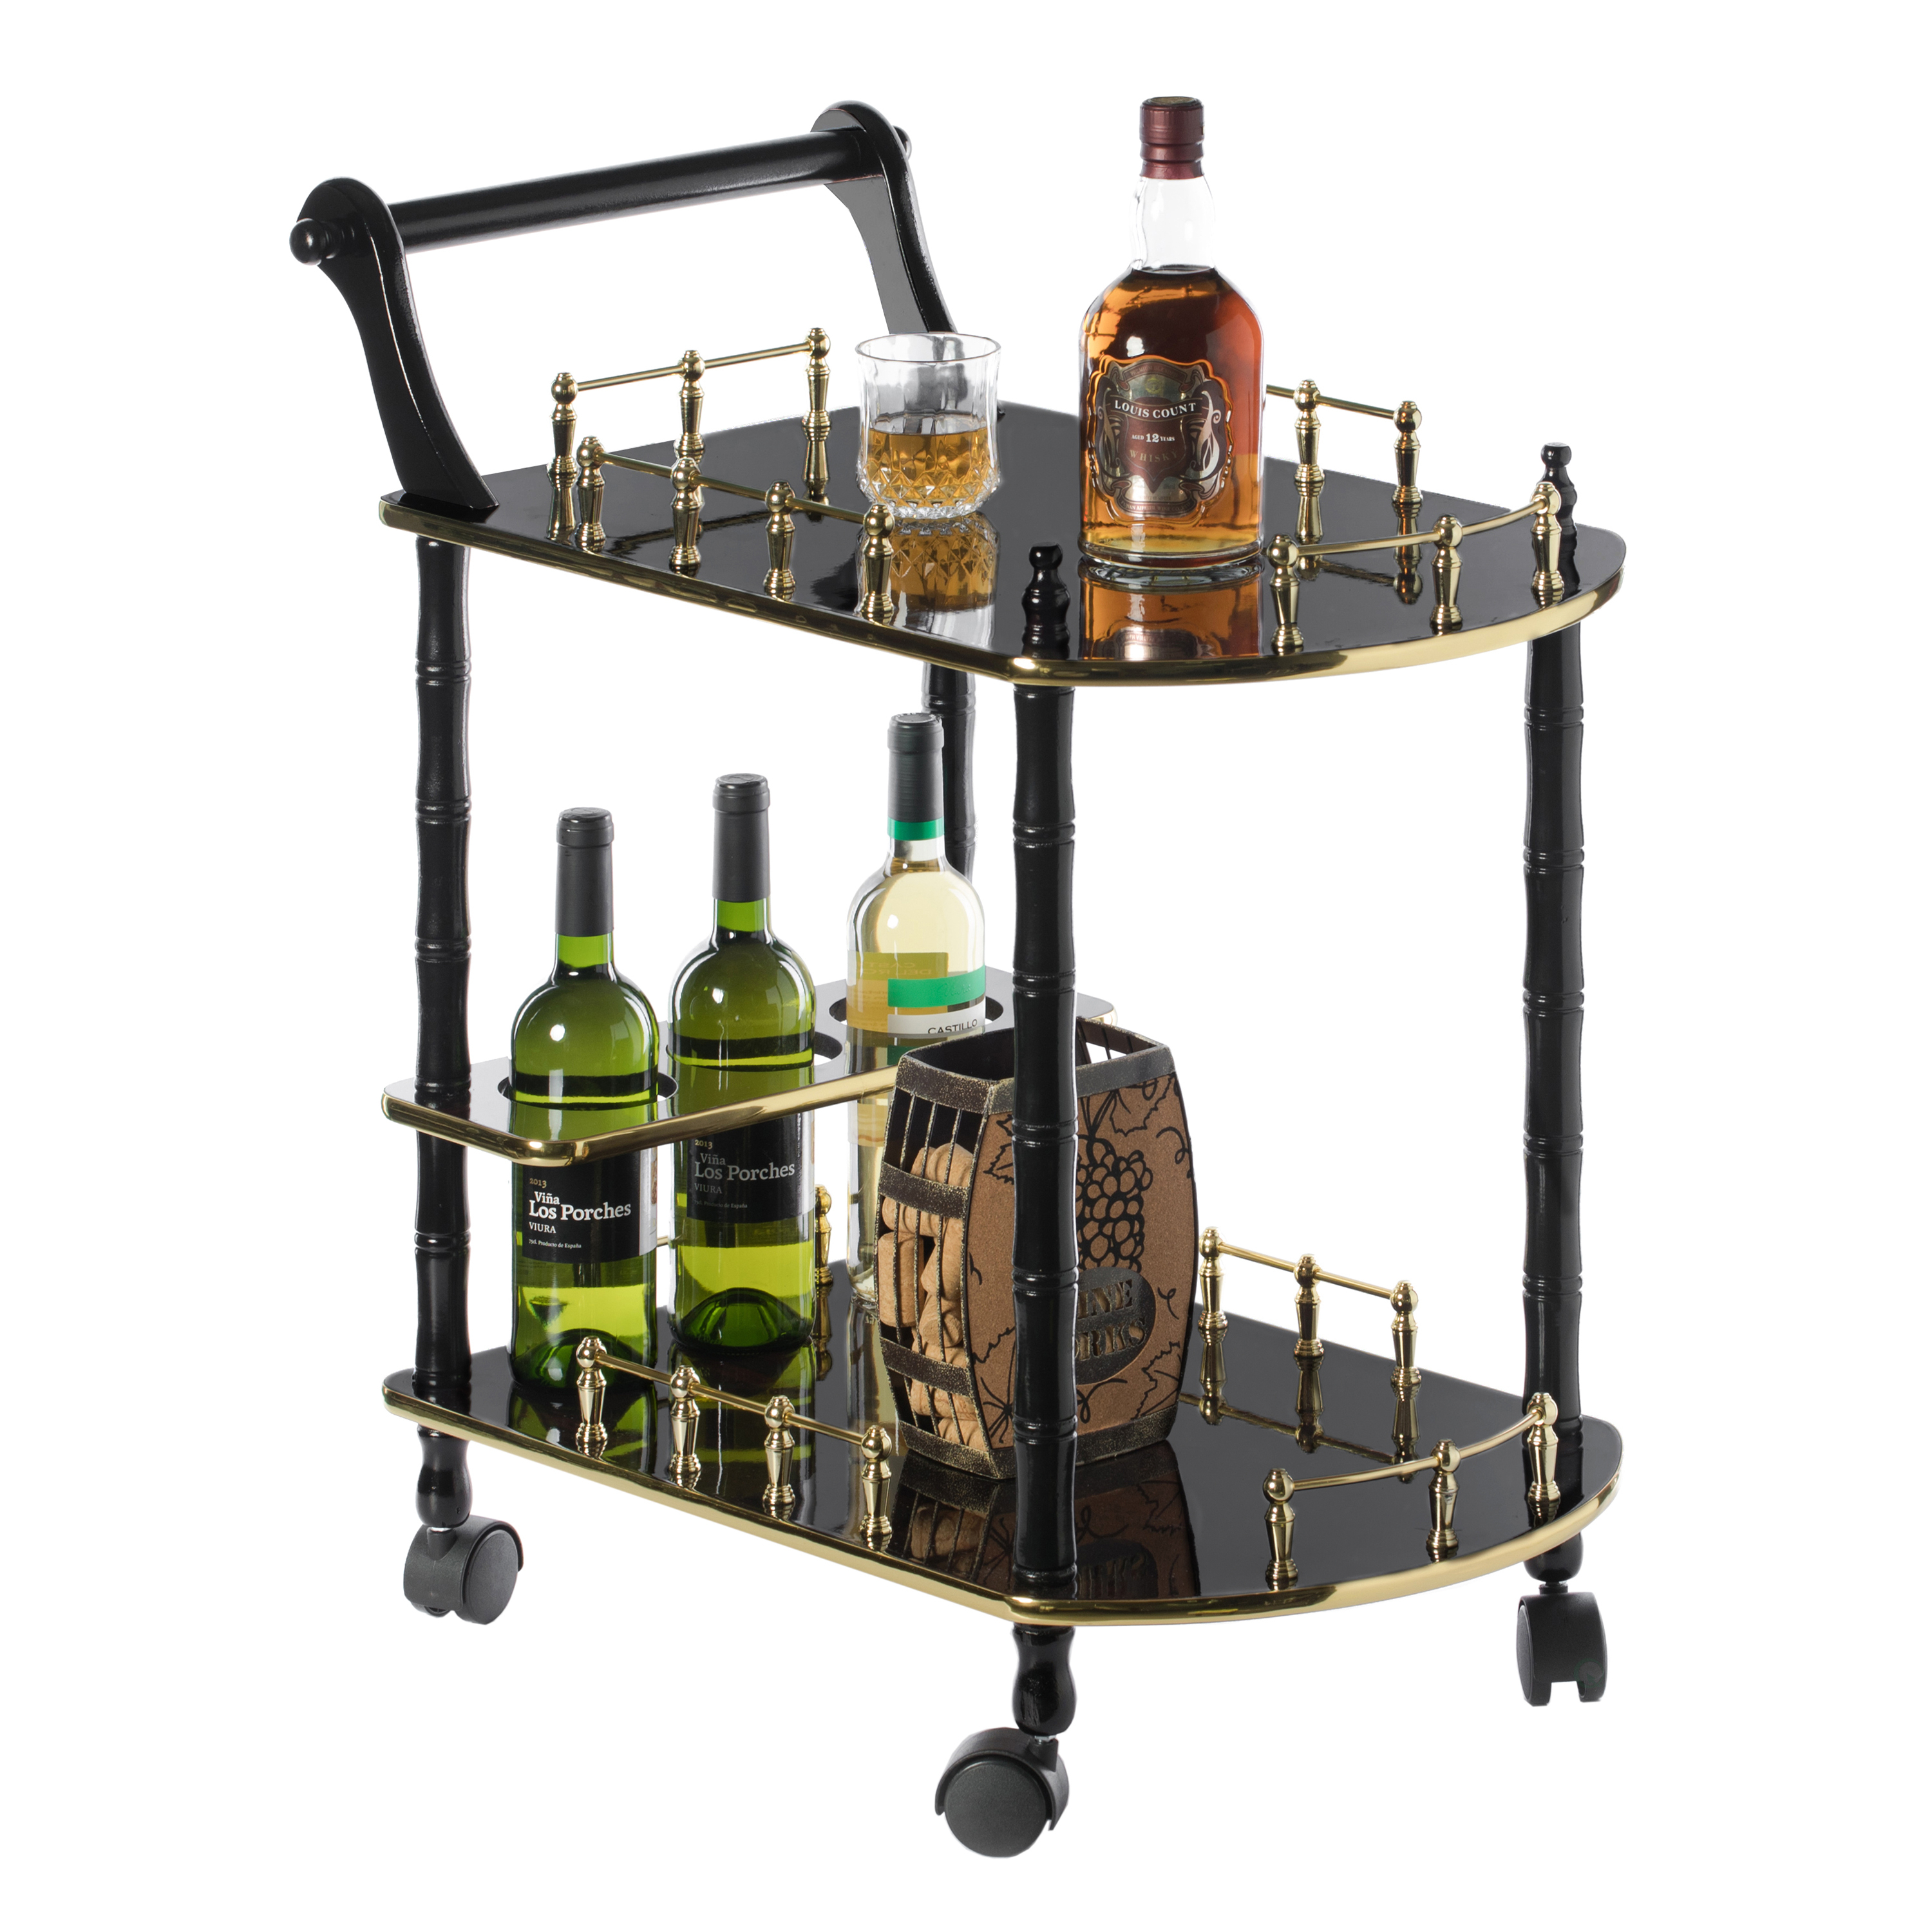 Wood Serving Bar Cart Tea Trolley With 2 Tier Shelves And Rolling Wheels - Brown